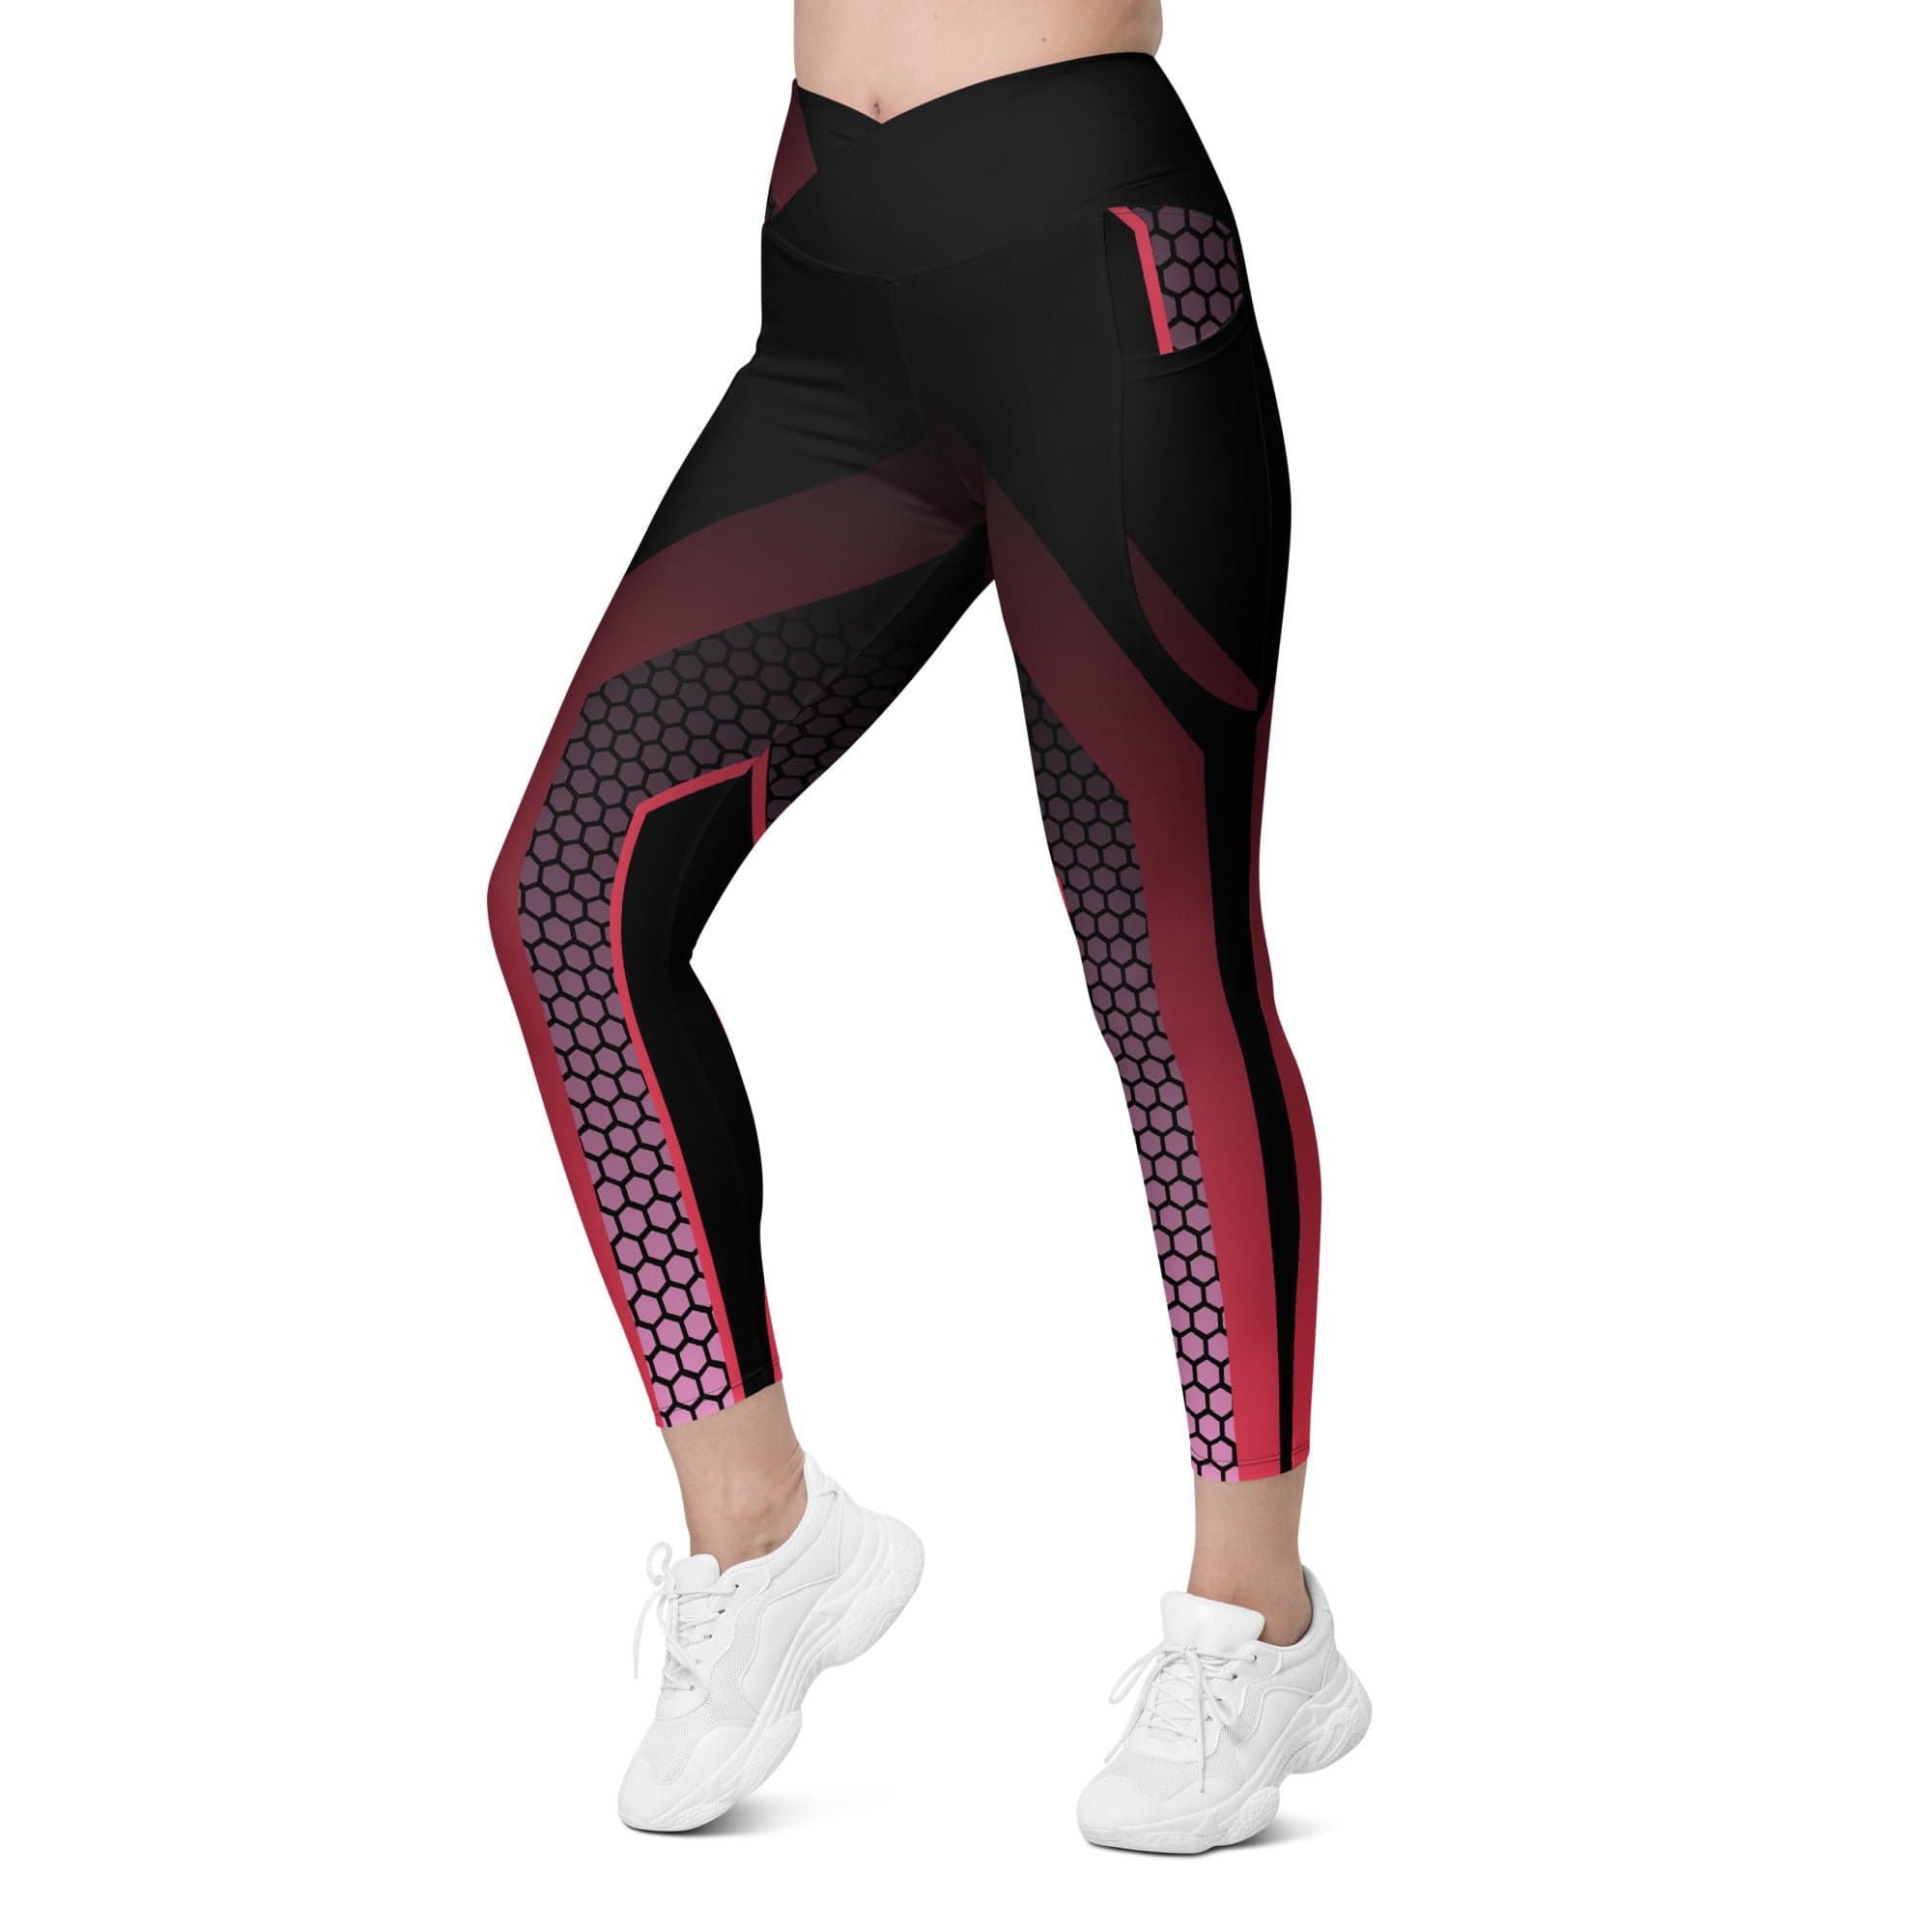 Fire Cornhole Crossover leggings with pockets and hexagon pattern